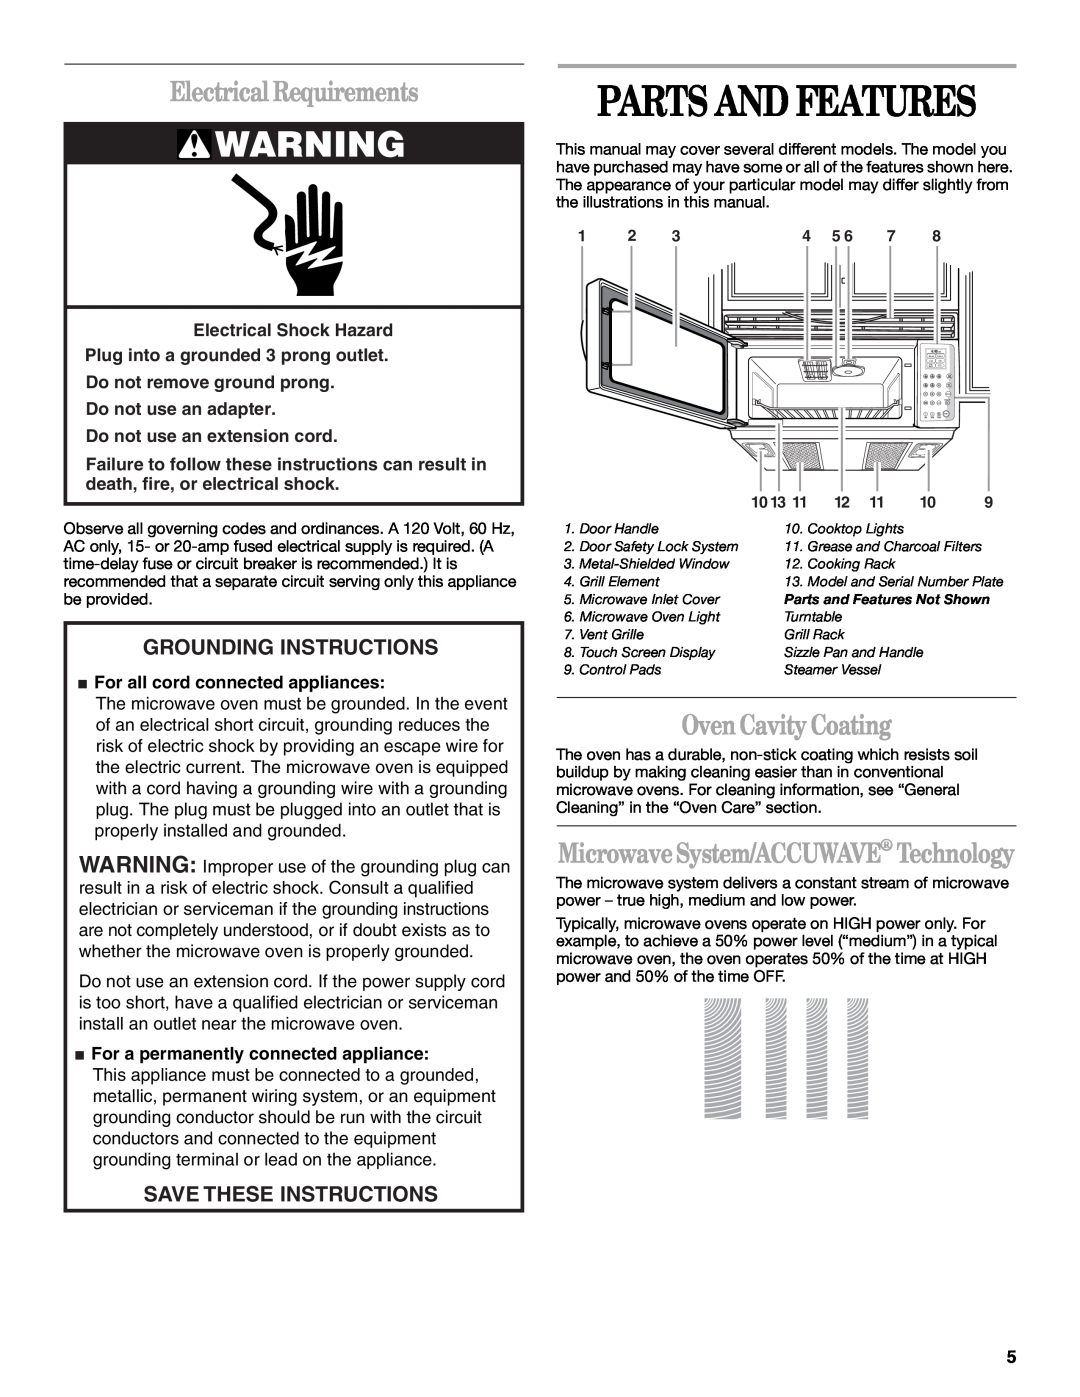 Whirlpool GH9177XL manual Parts And Features, Electrical Requirements, Oven Cavity Coating, Grounding Instructions 